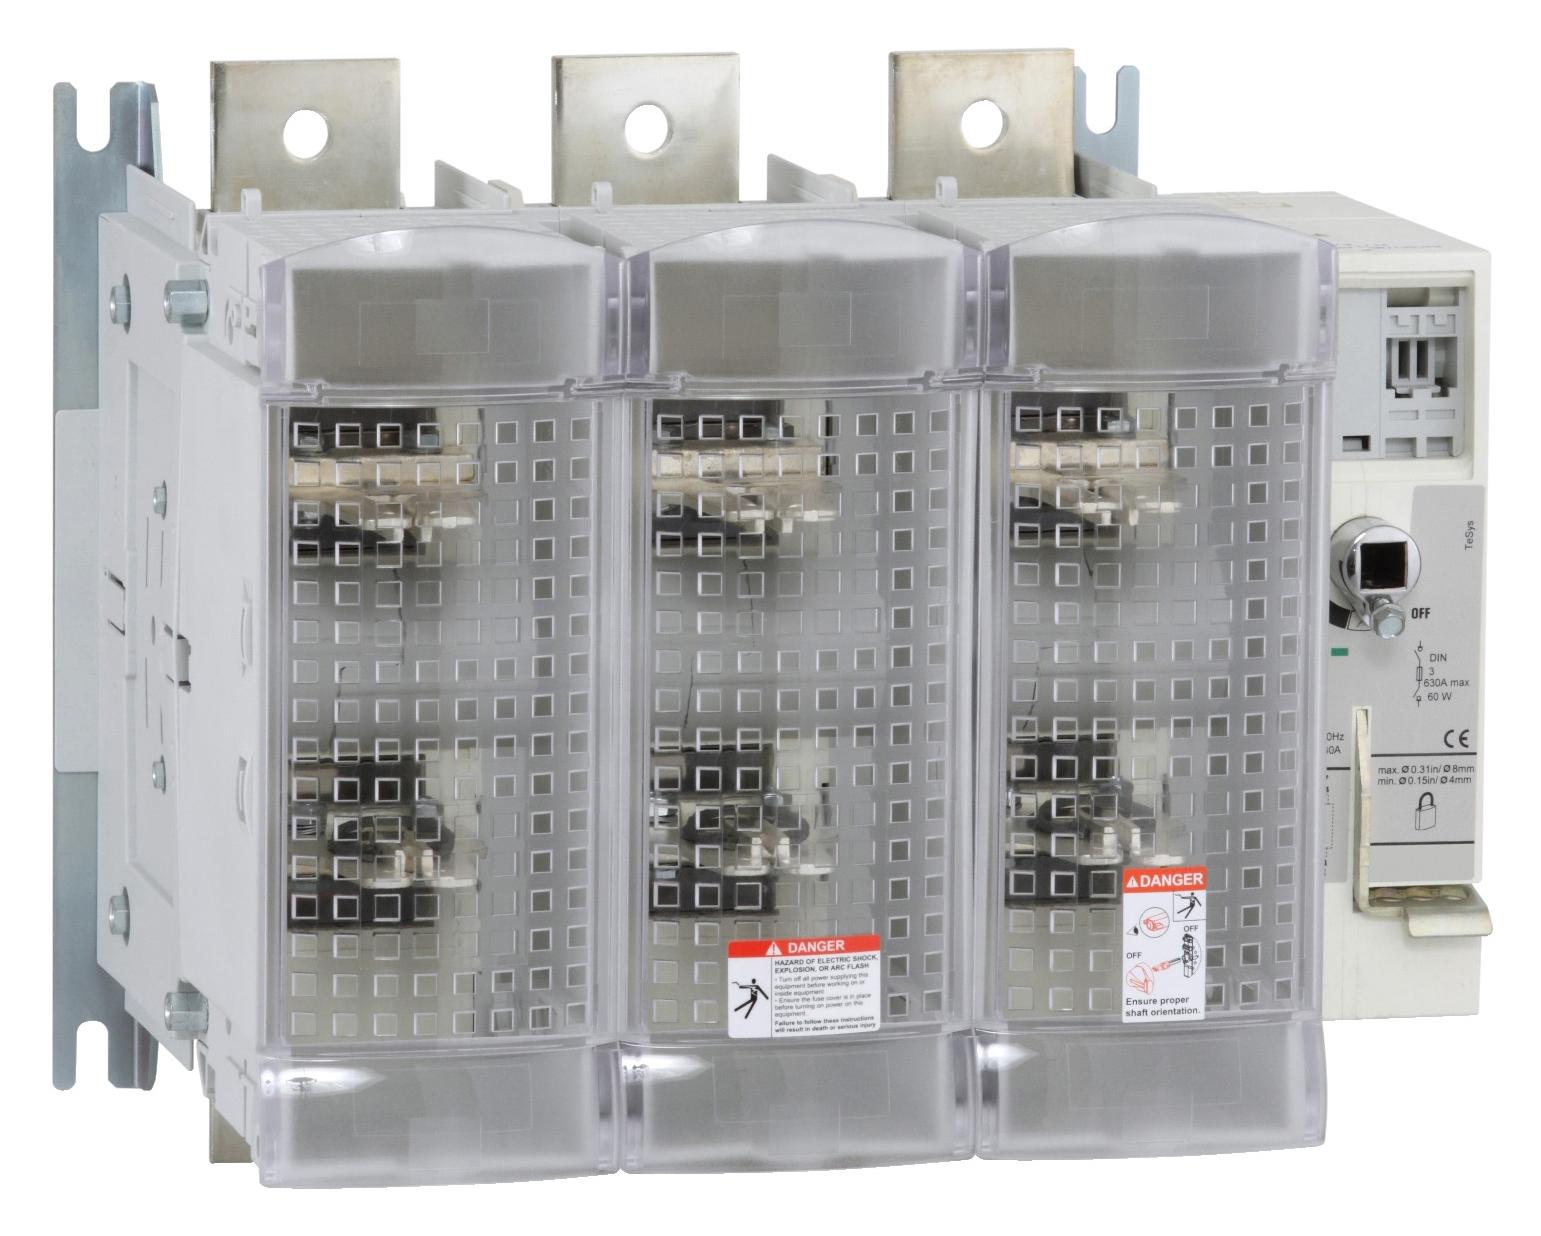 SCHNEIDER ELECTRIC Fused GS2S3 FUSE DISCONNECT SW. 3X 630A 3 SCHNEIDER ELECTRIC 3406299 GS2S3